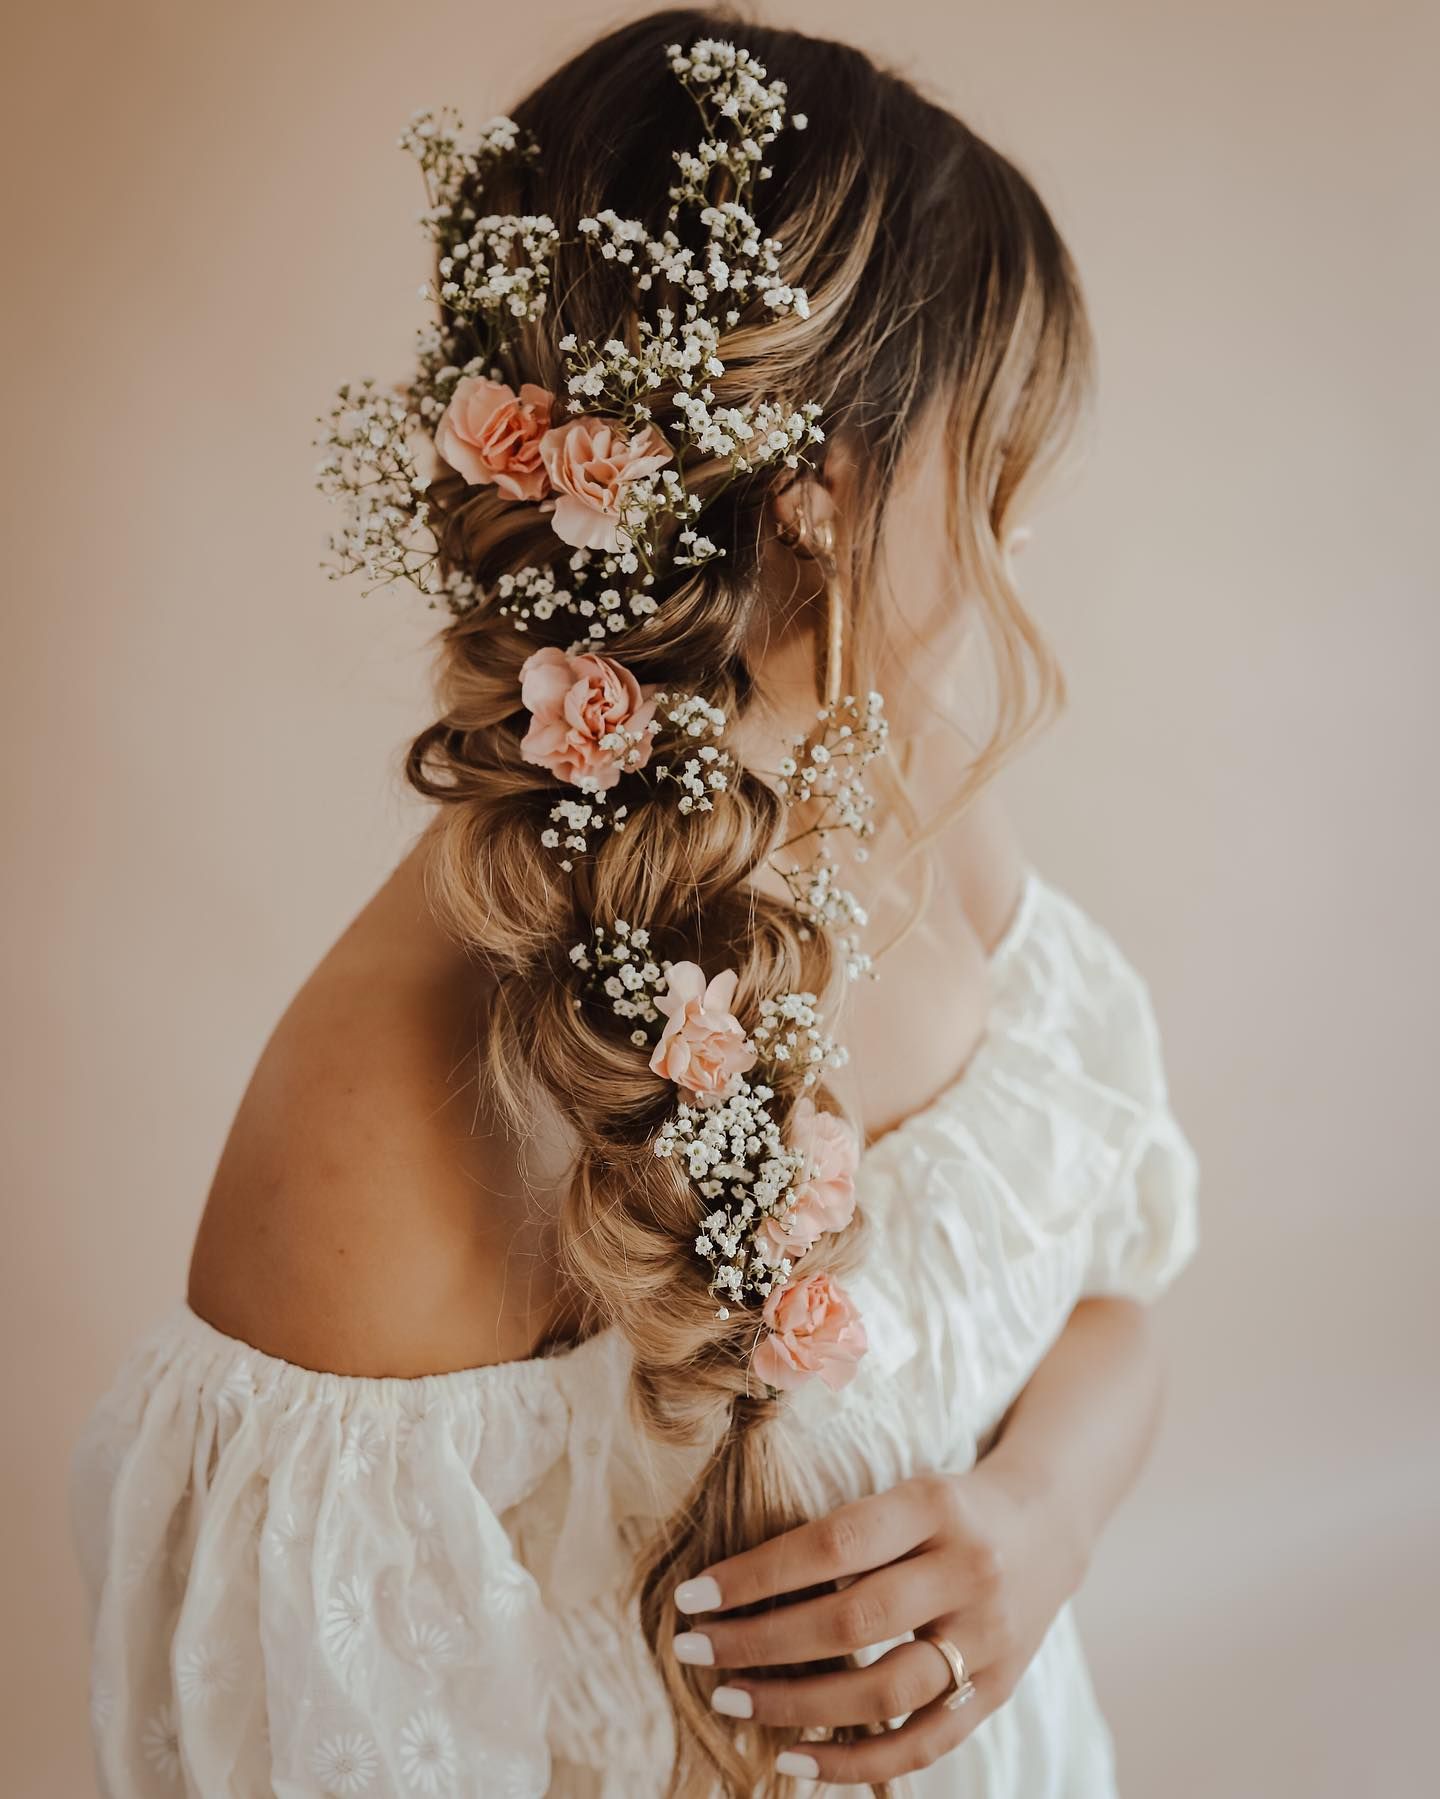 bridal braid hairstyle with flowers weaved throughout